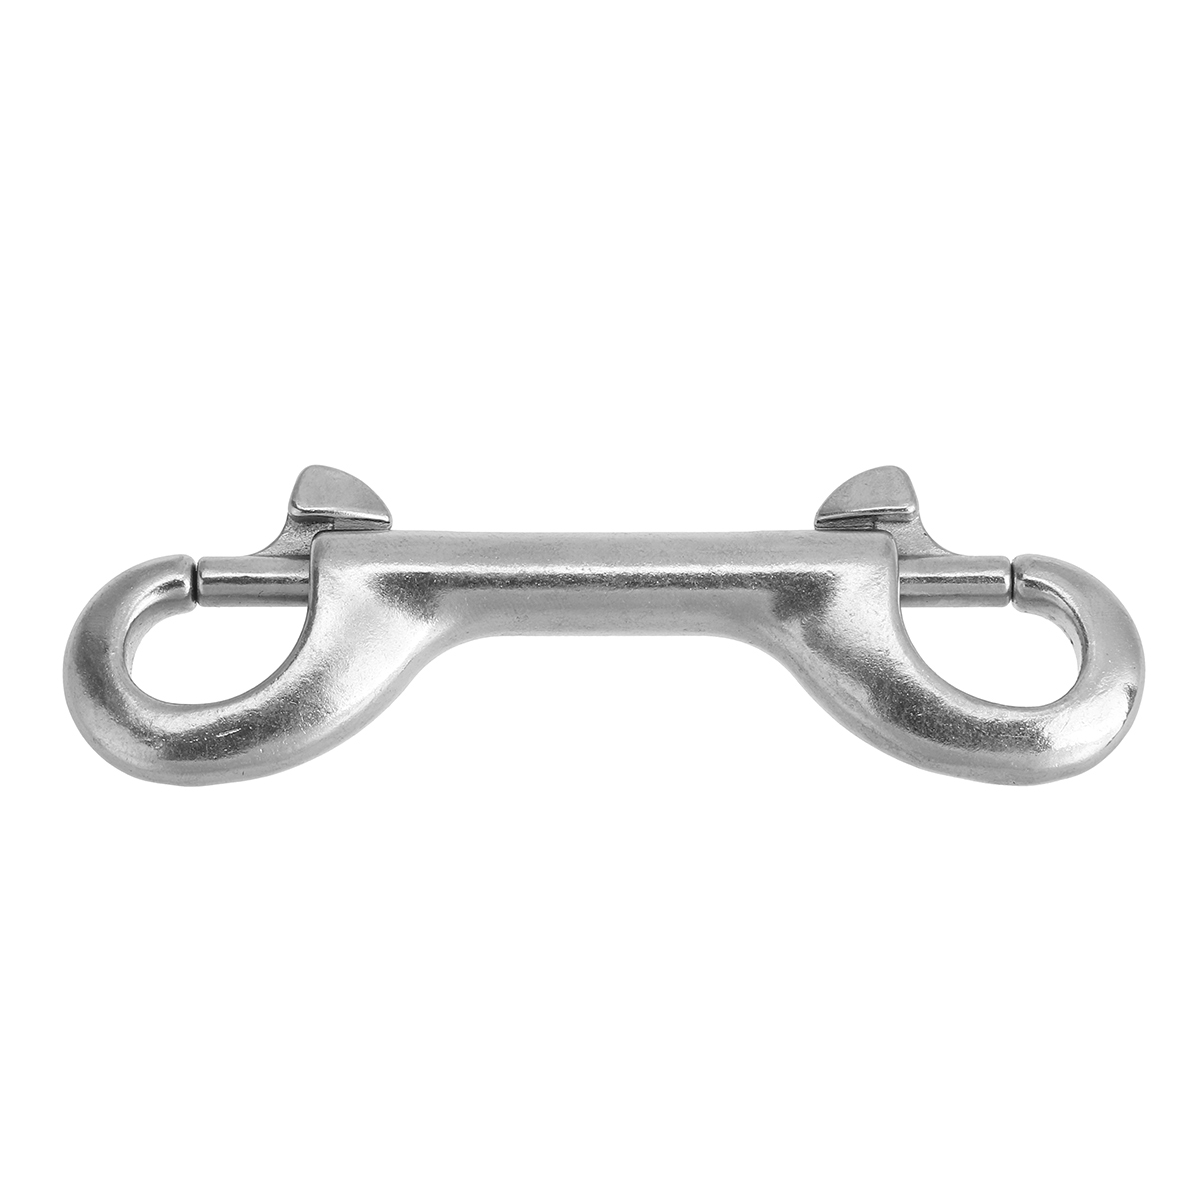 Double-End-Bolt-Snap-316-Stainless-Steel-Hook-Marine-Grade-Diving-Clips-Snap-Key-1724912-4